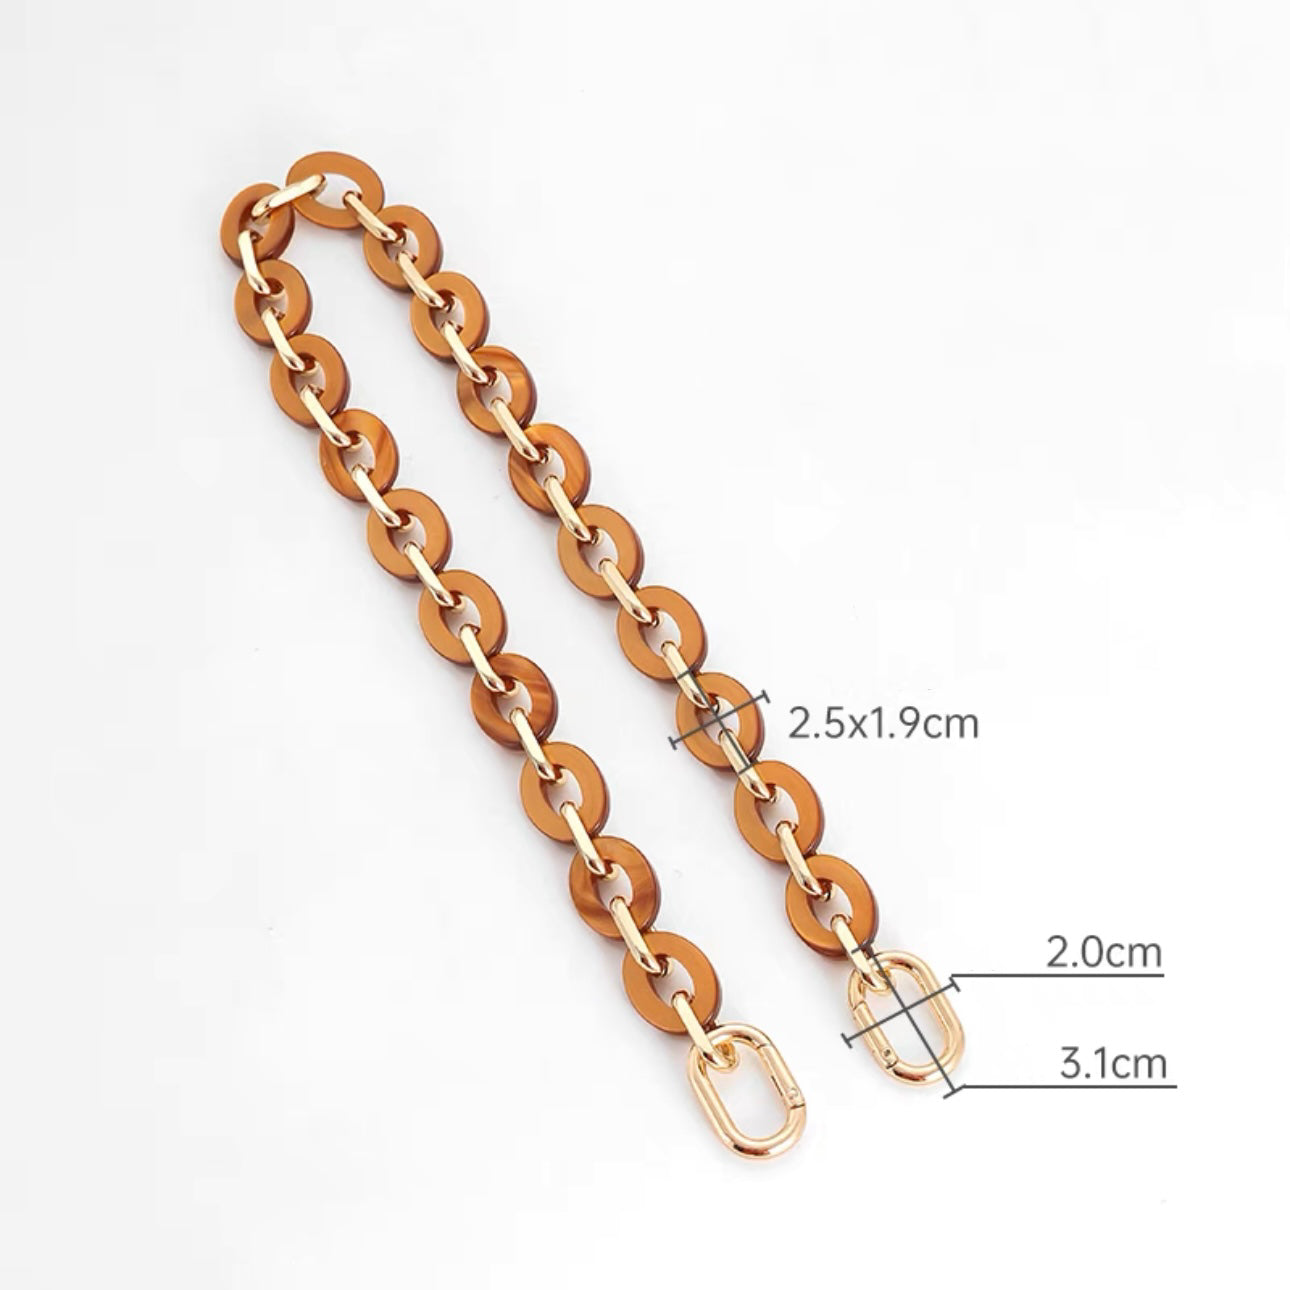   Chain Strap For Purse | Chain Shoulder Strap | Aimere Luxury Collection